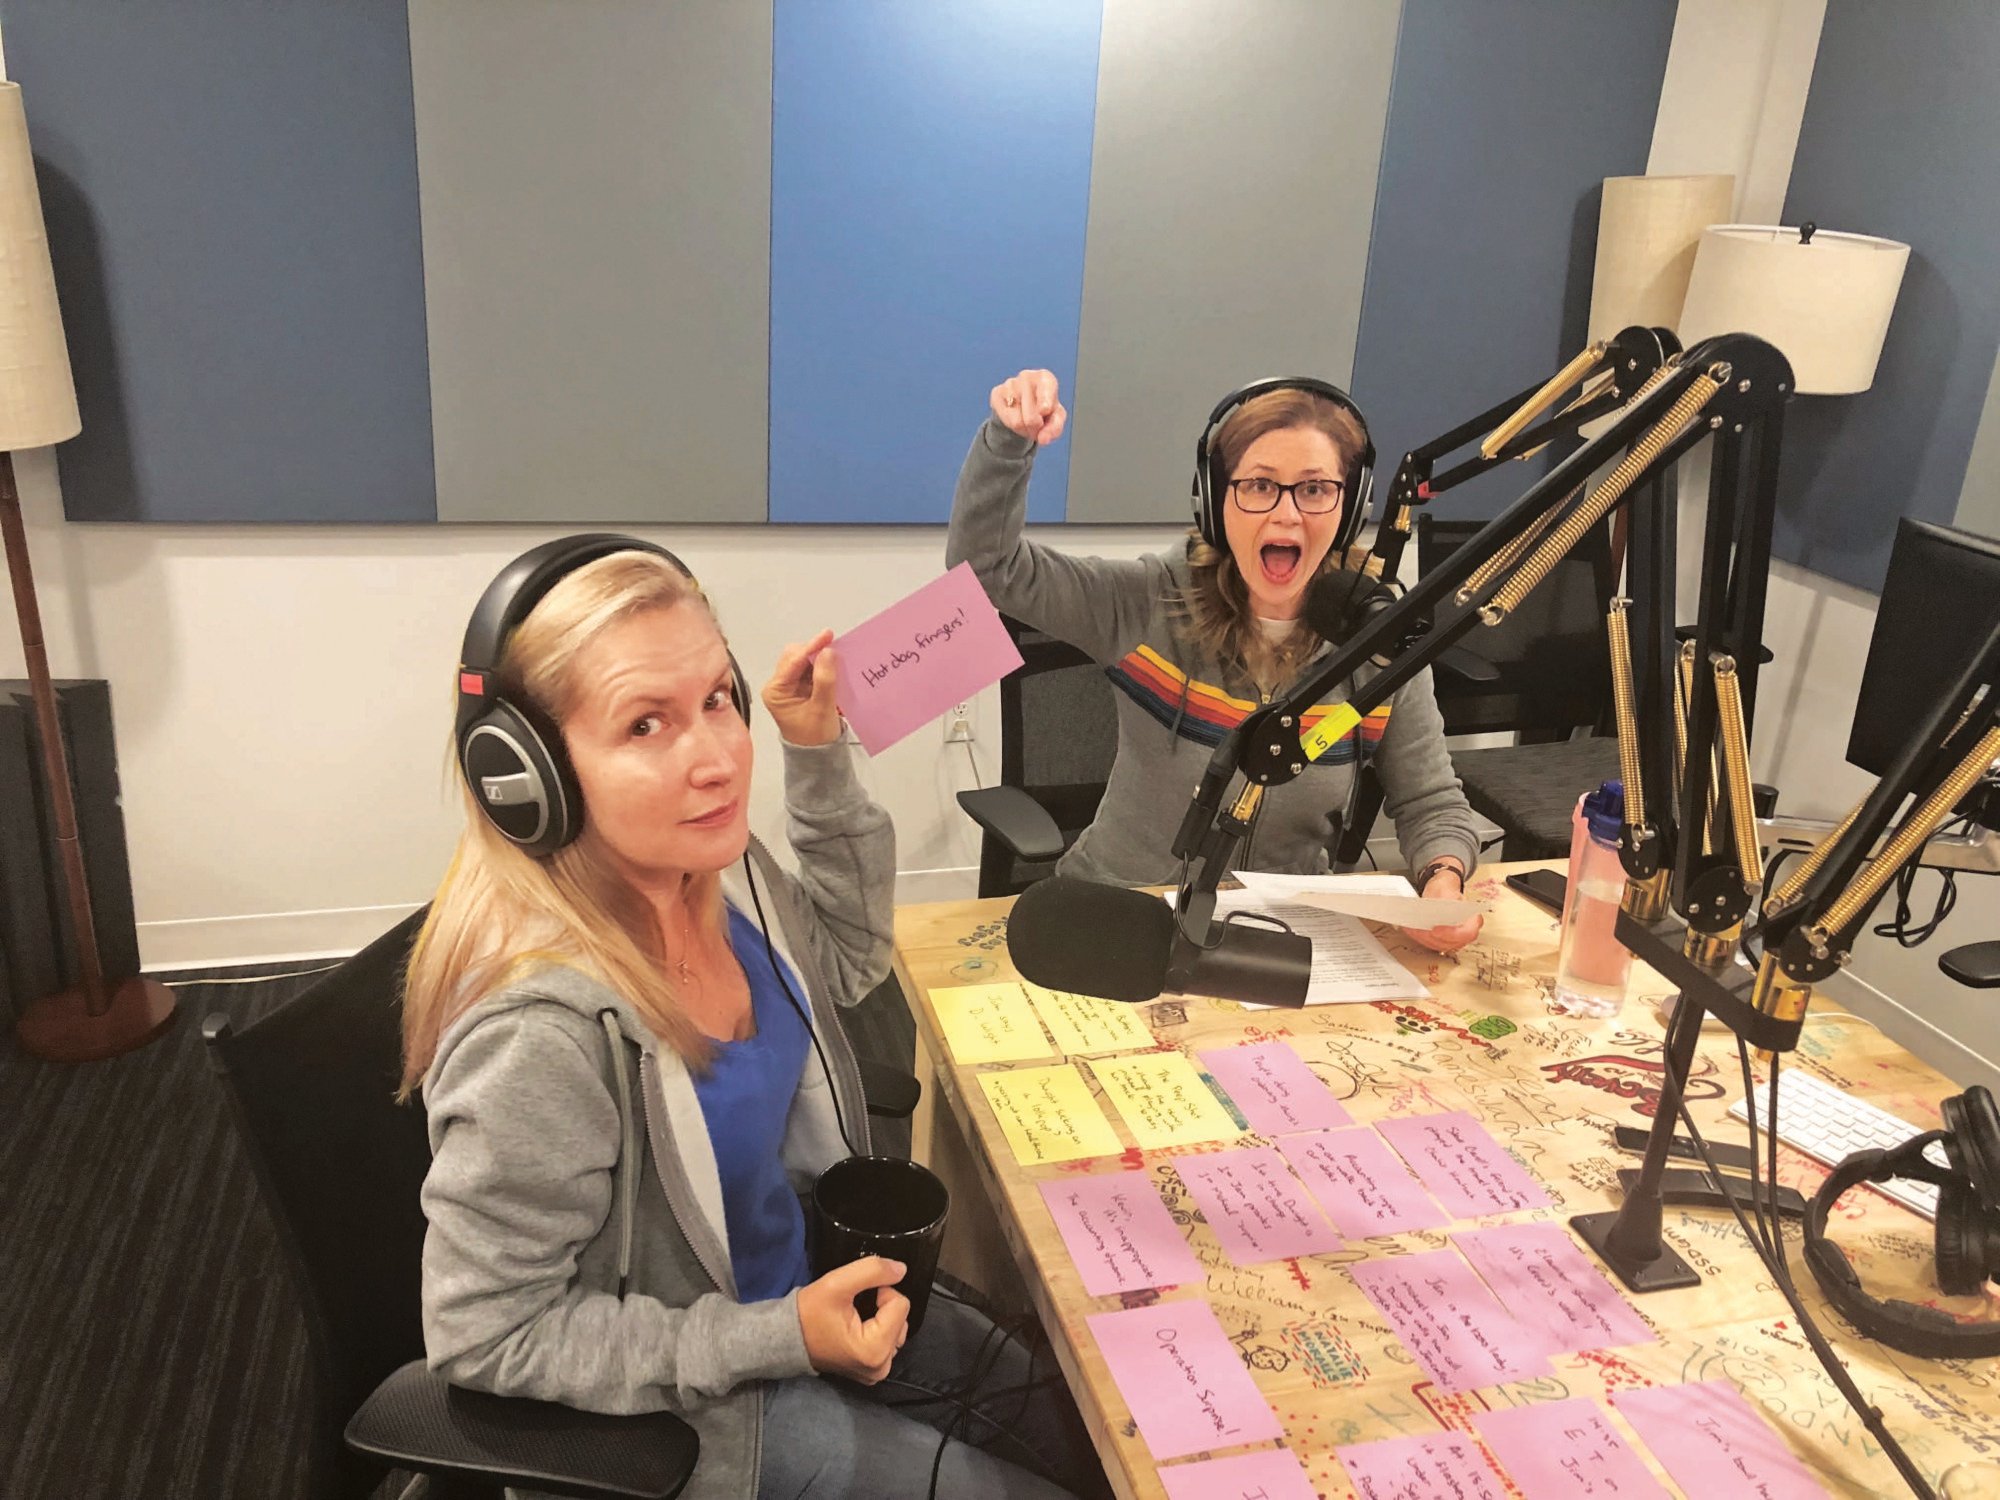 Two women (Jenna Fischer and Angela Kinsey) sitting in a recording studio in front of microphones.